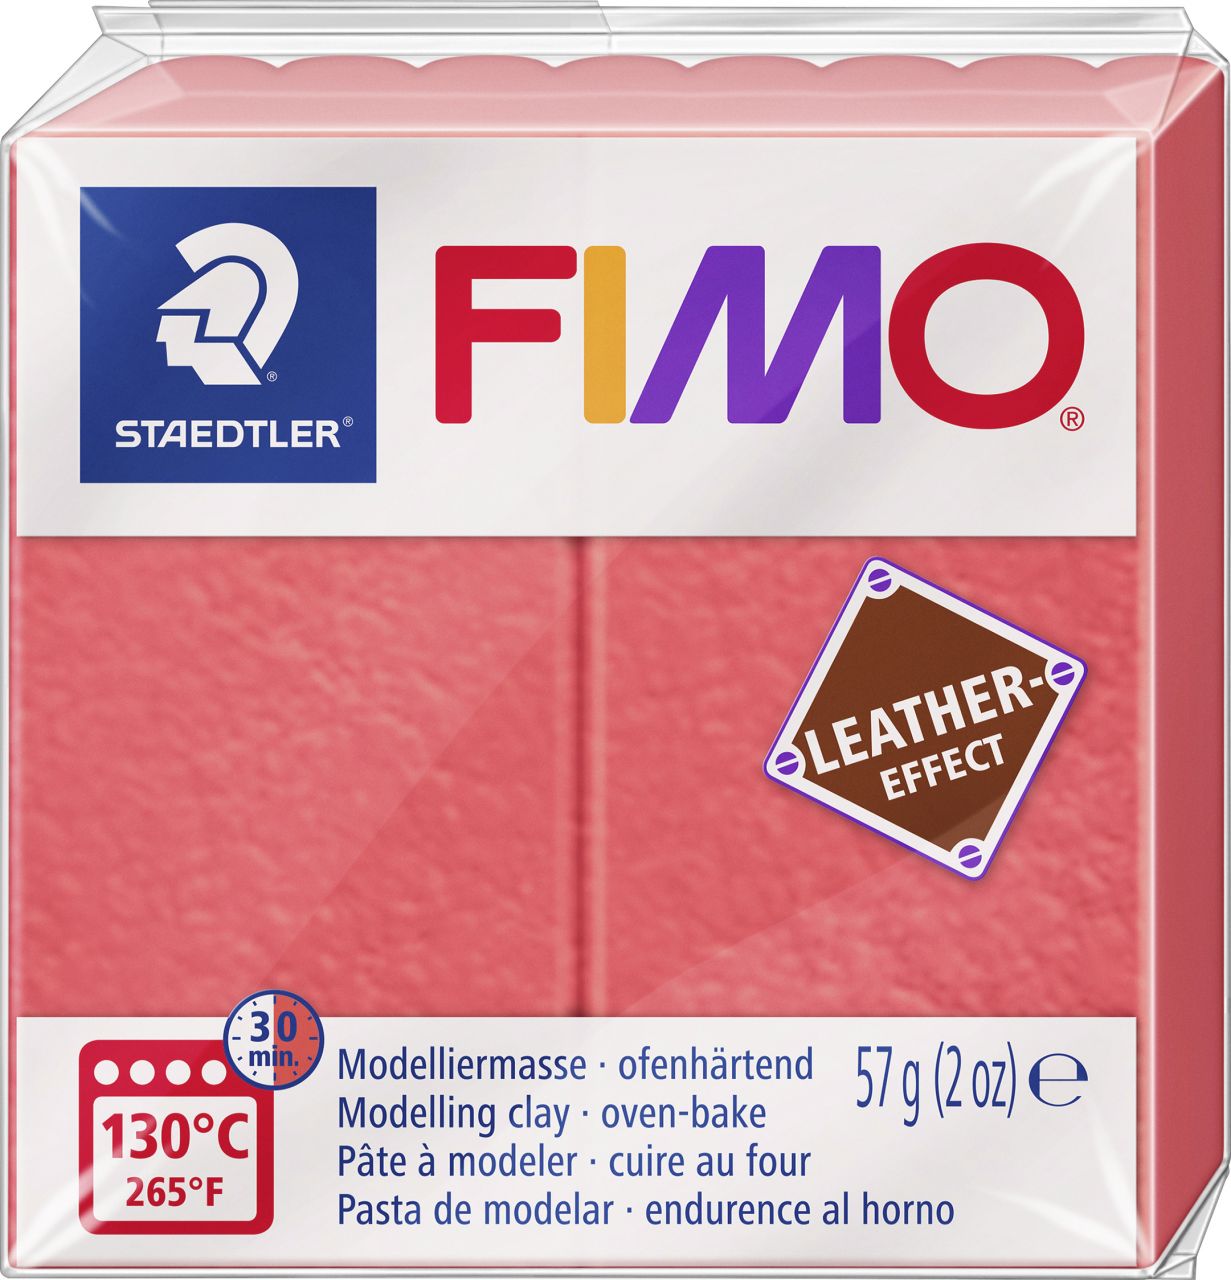 Staedtler FIMO leather-effect wassermelone 57 g GLO663401602